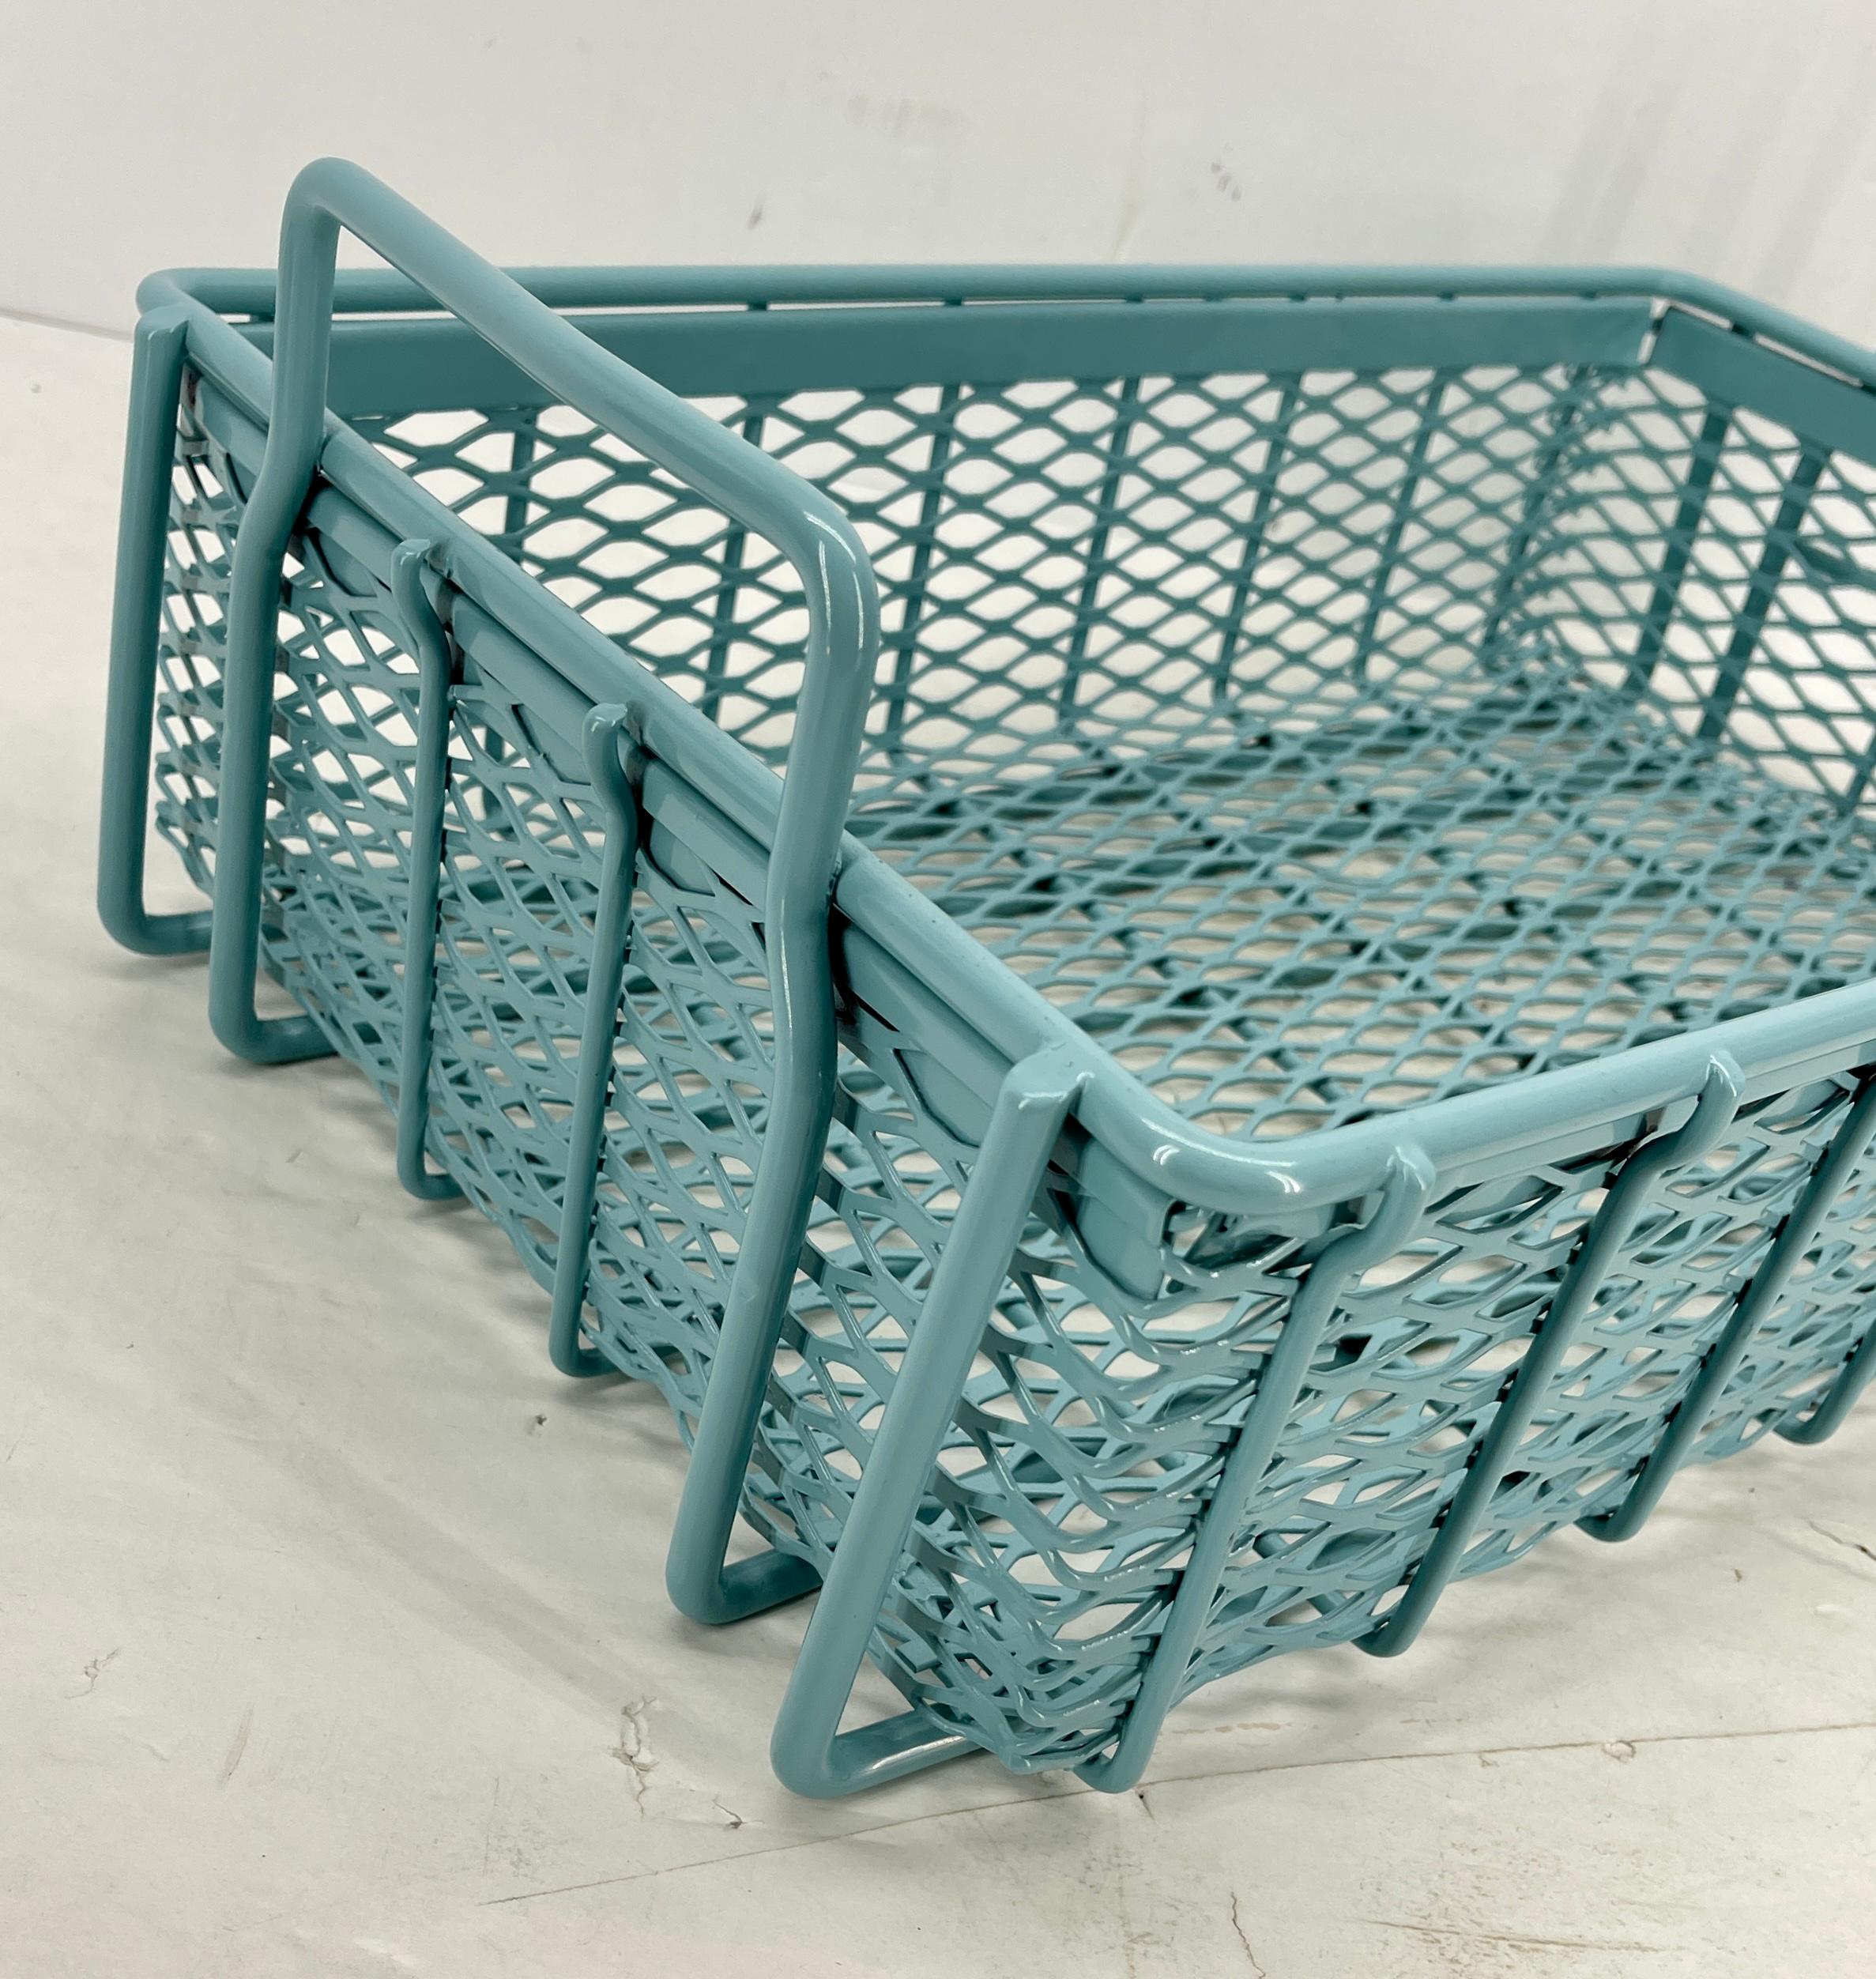 Vintage Metal Bin Powder Coated Turquoise, Industrial Era In Good Condition For Sale In Haddonfield, NJ